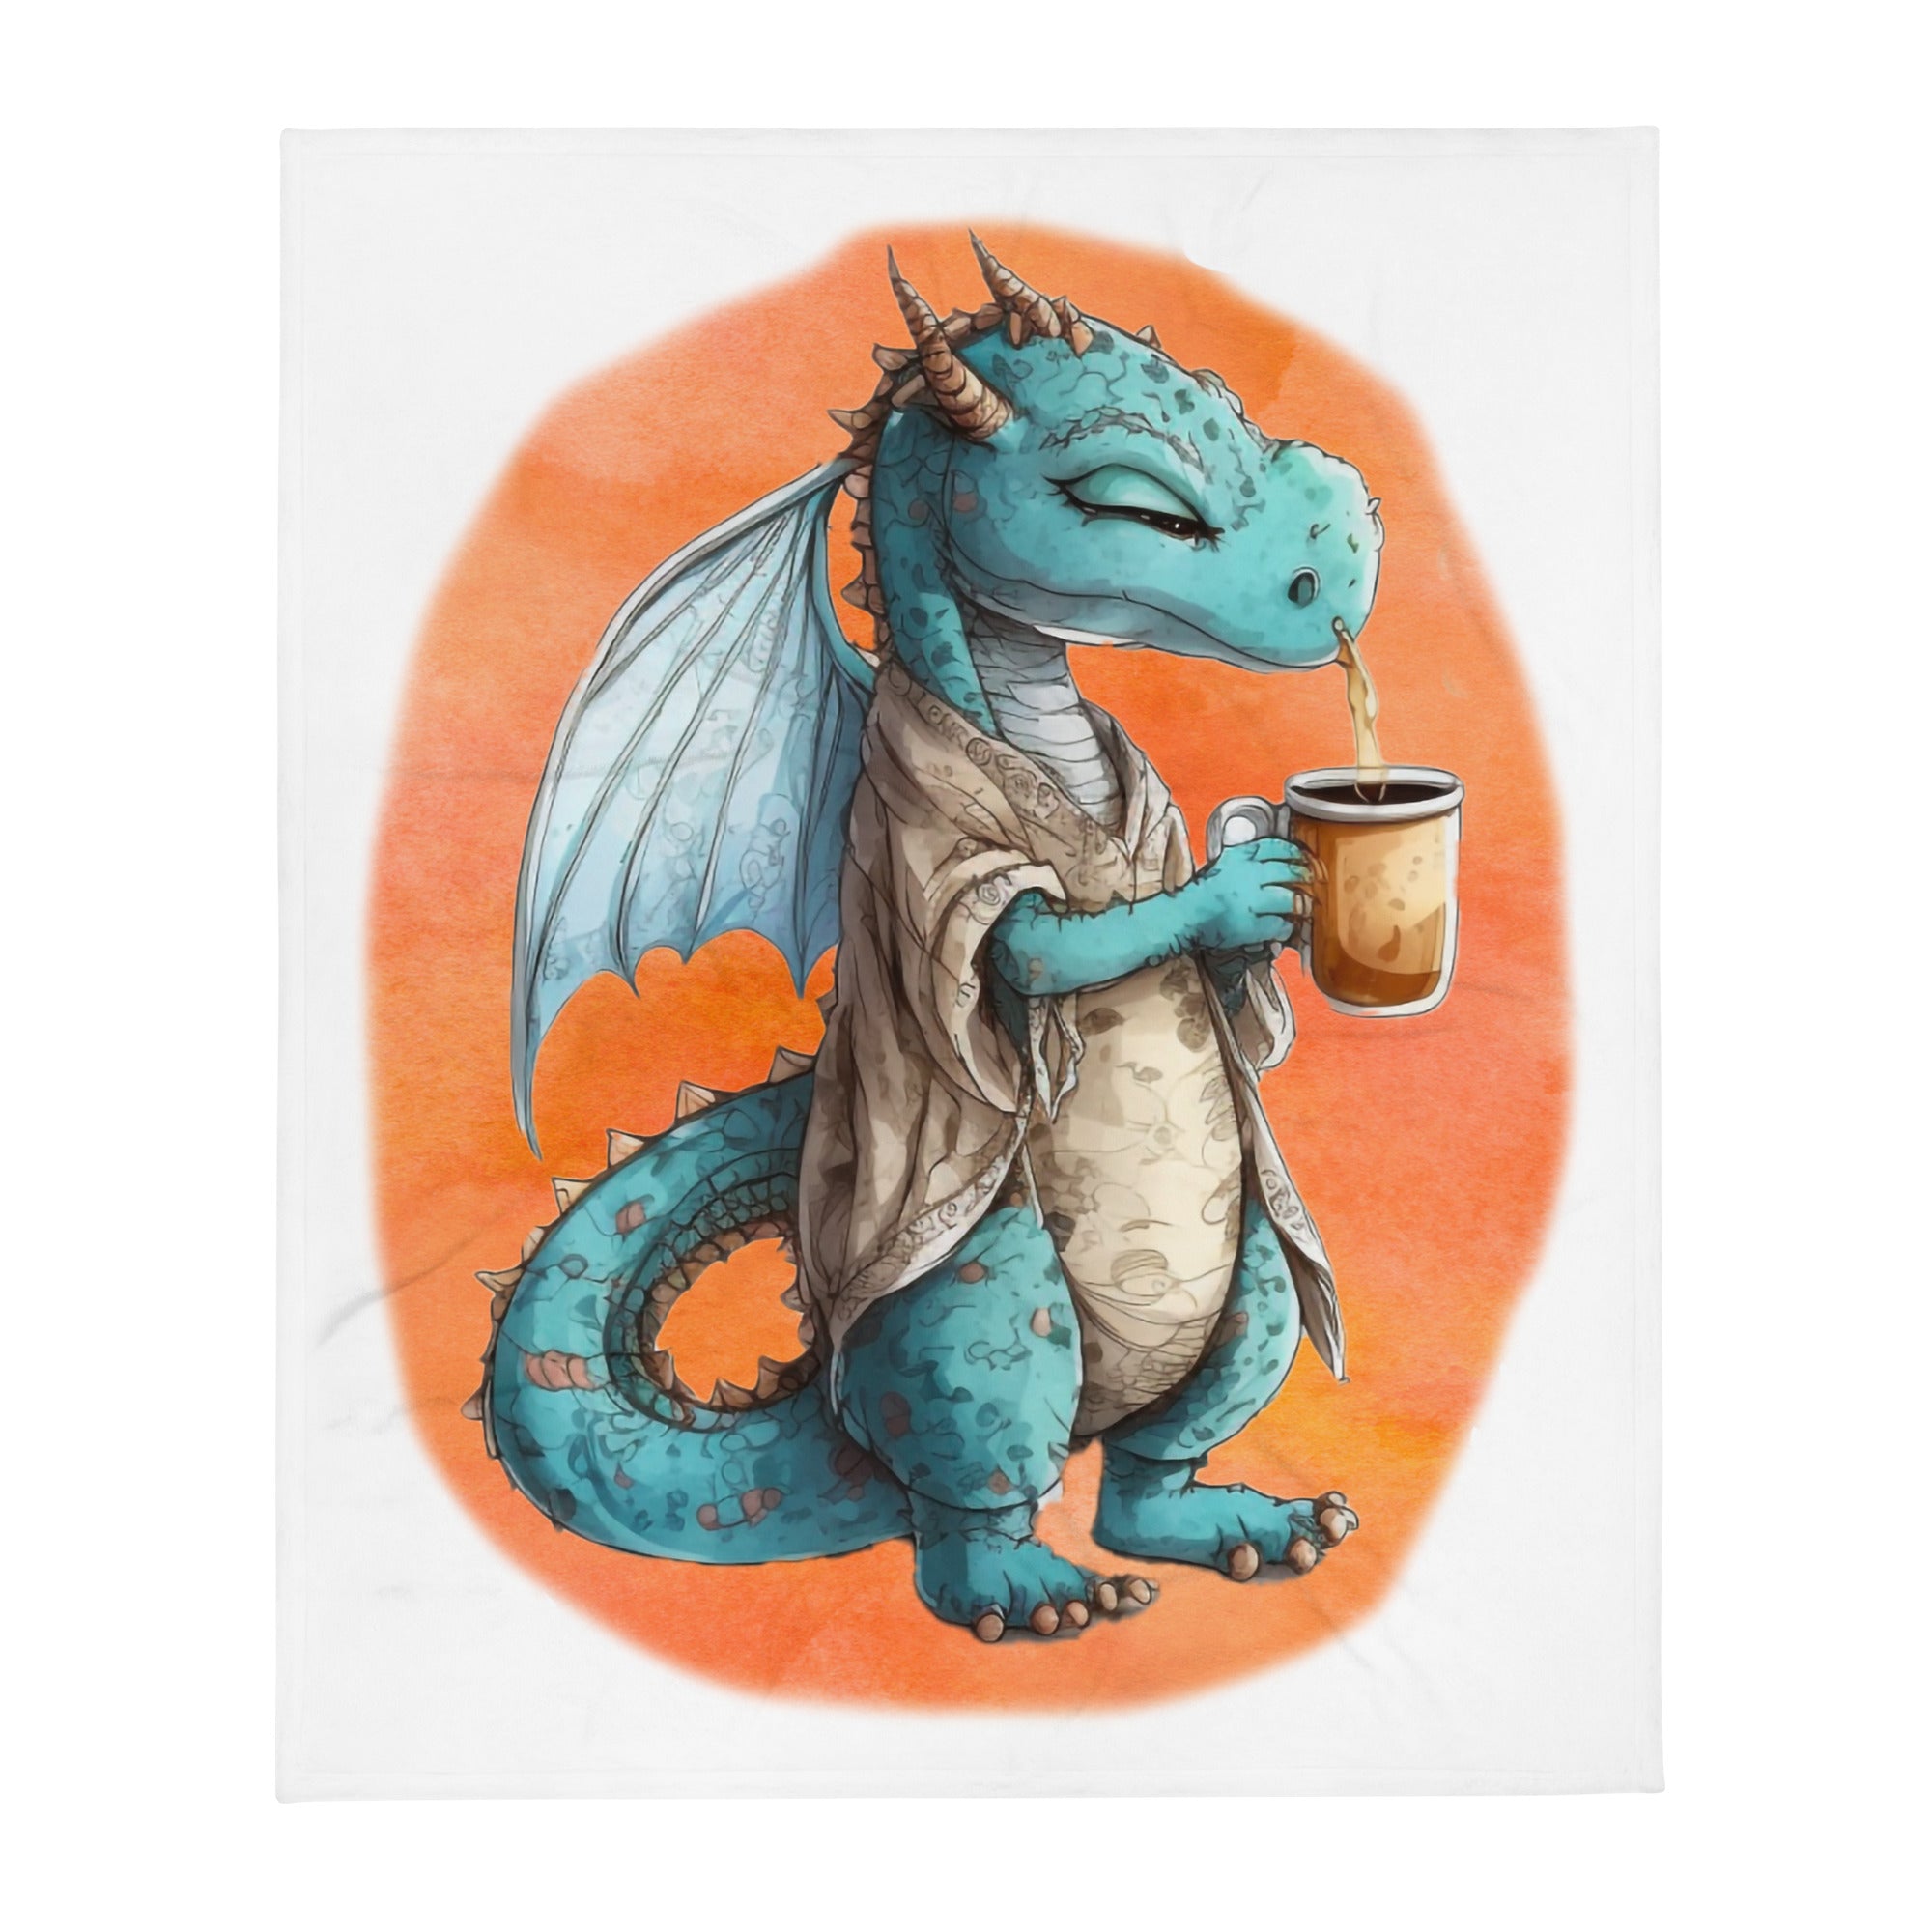 Sleepy Dragon 100% Polyester Soft Silk Touch Fabric Throw Blanket - Cozy, Durable and Adorable